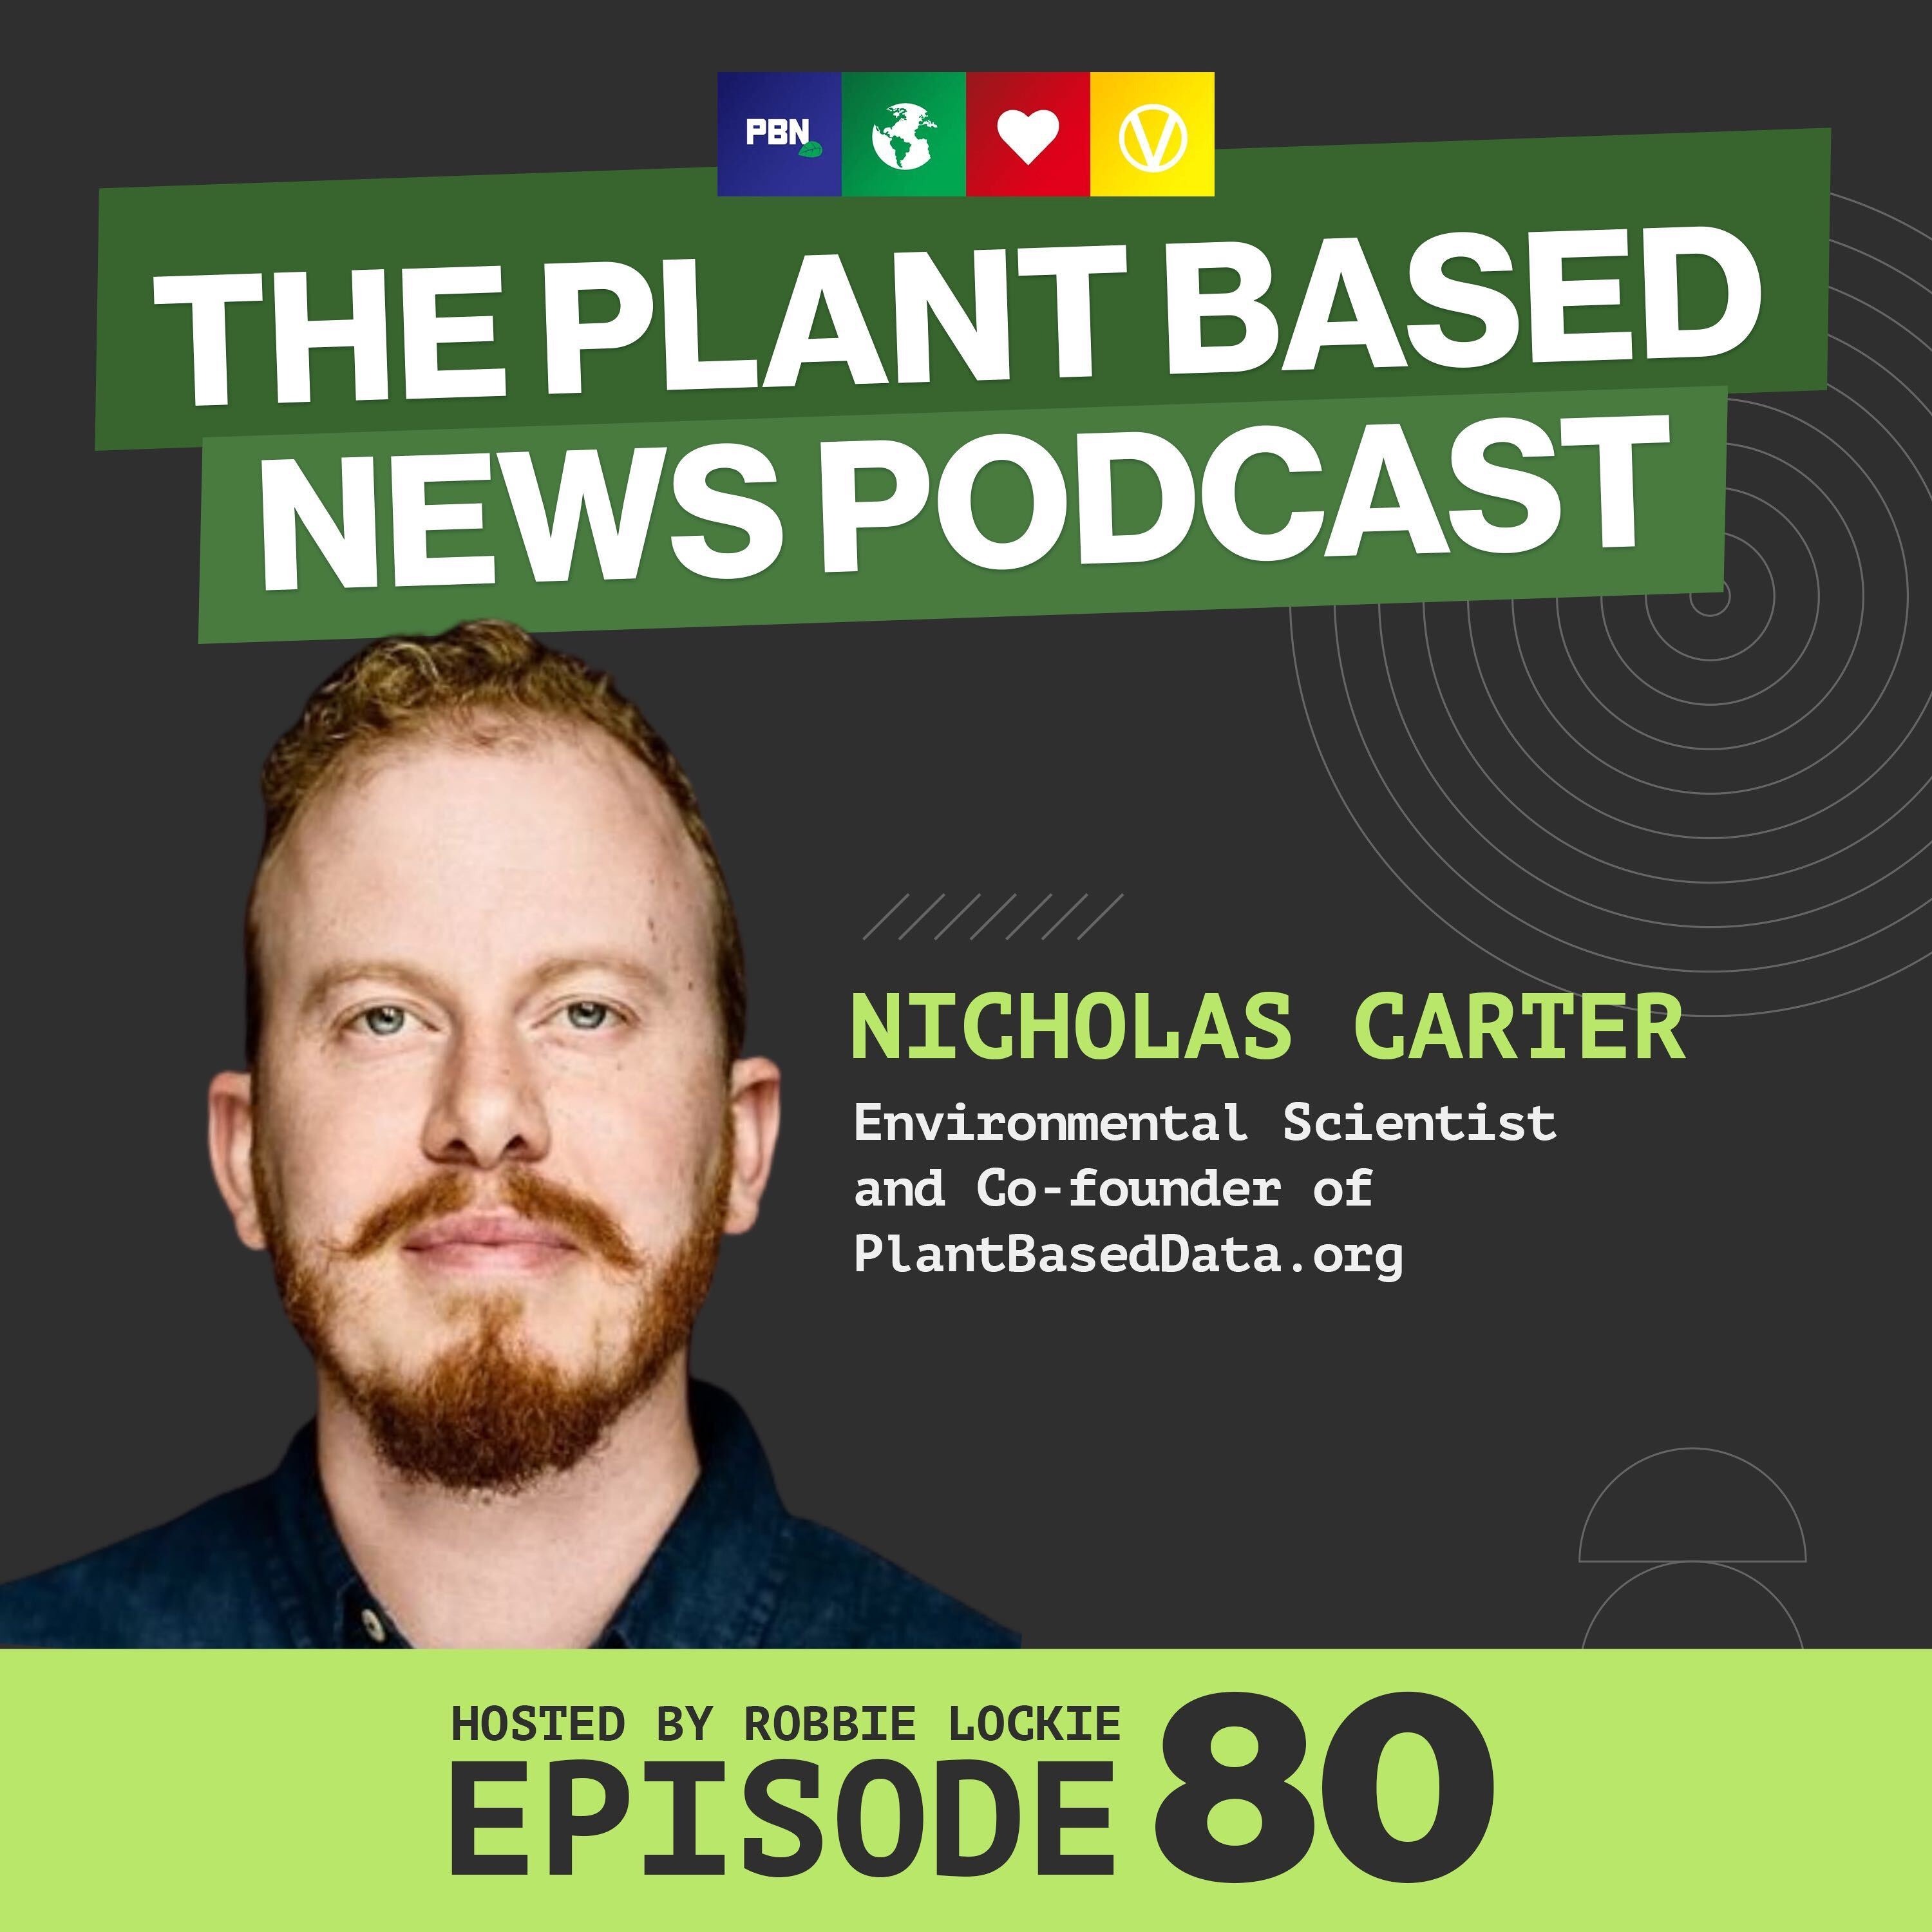 The Climate Crisis and Our Food System - Interview with Nicholas Carter / Episode 80